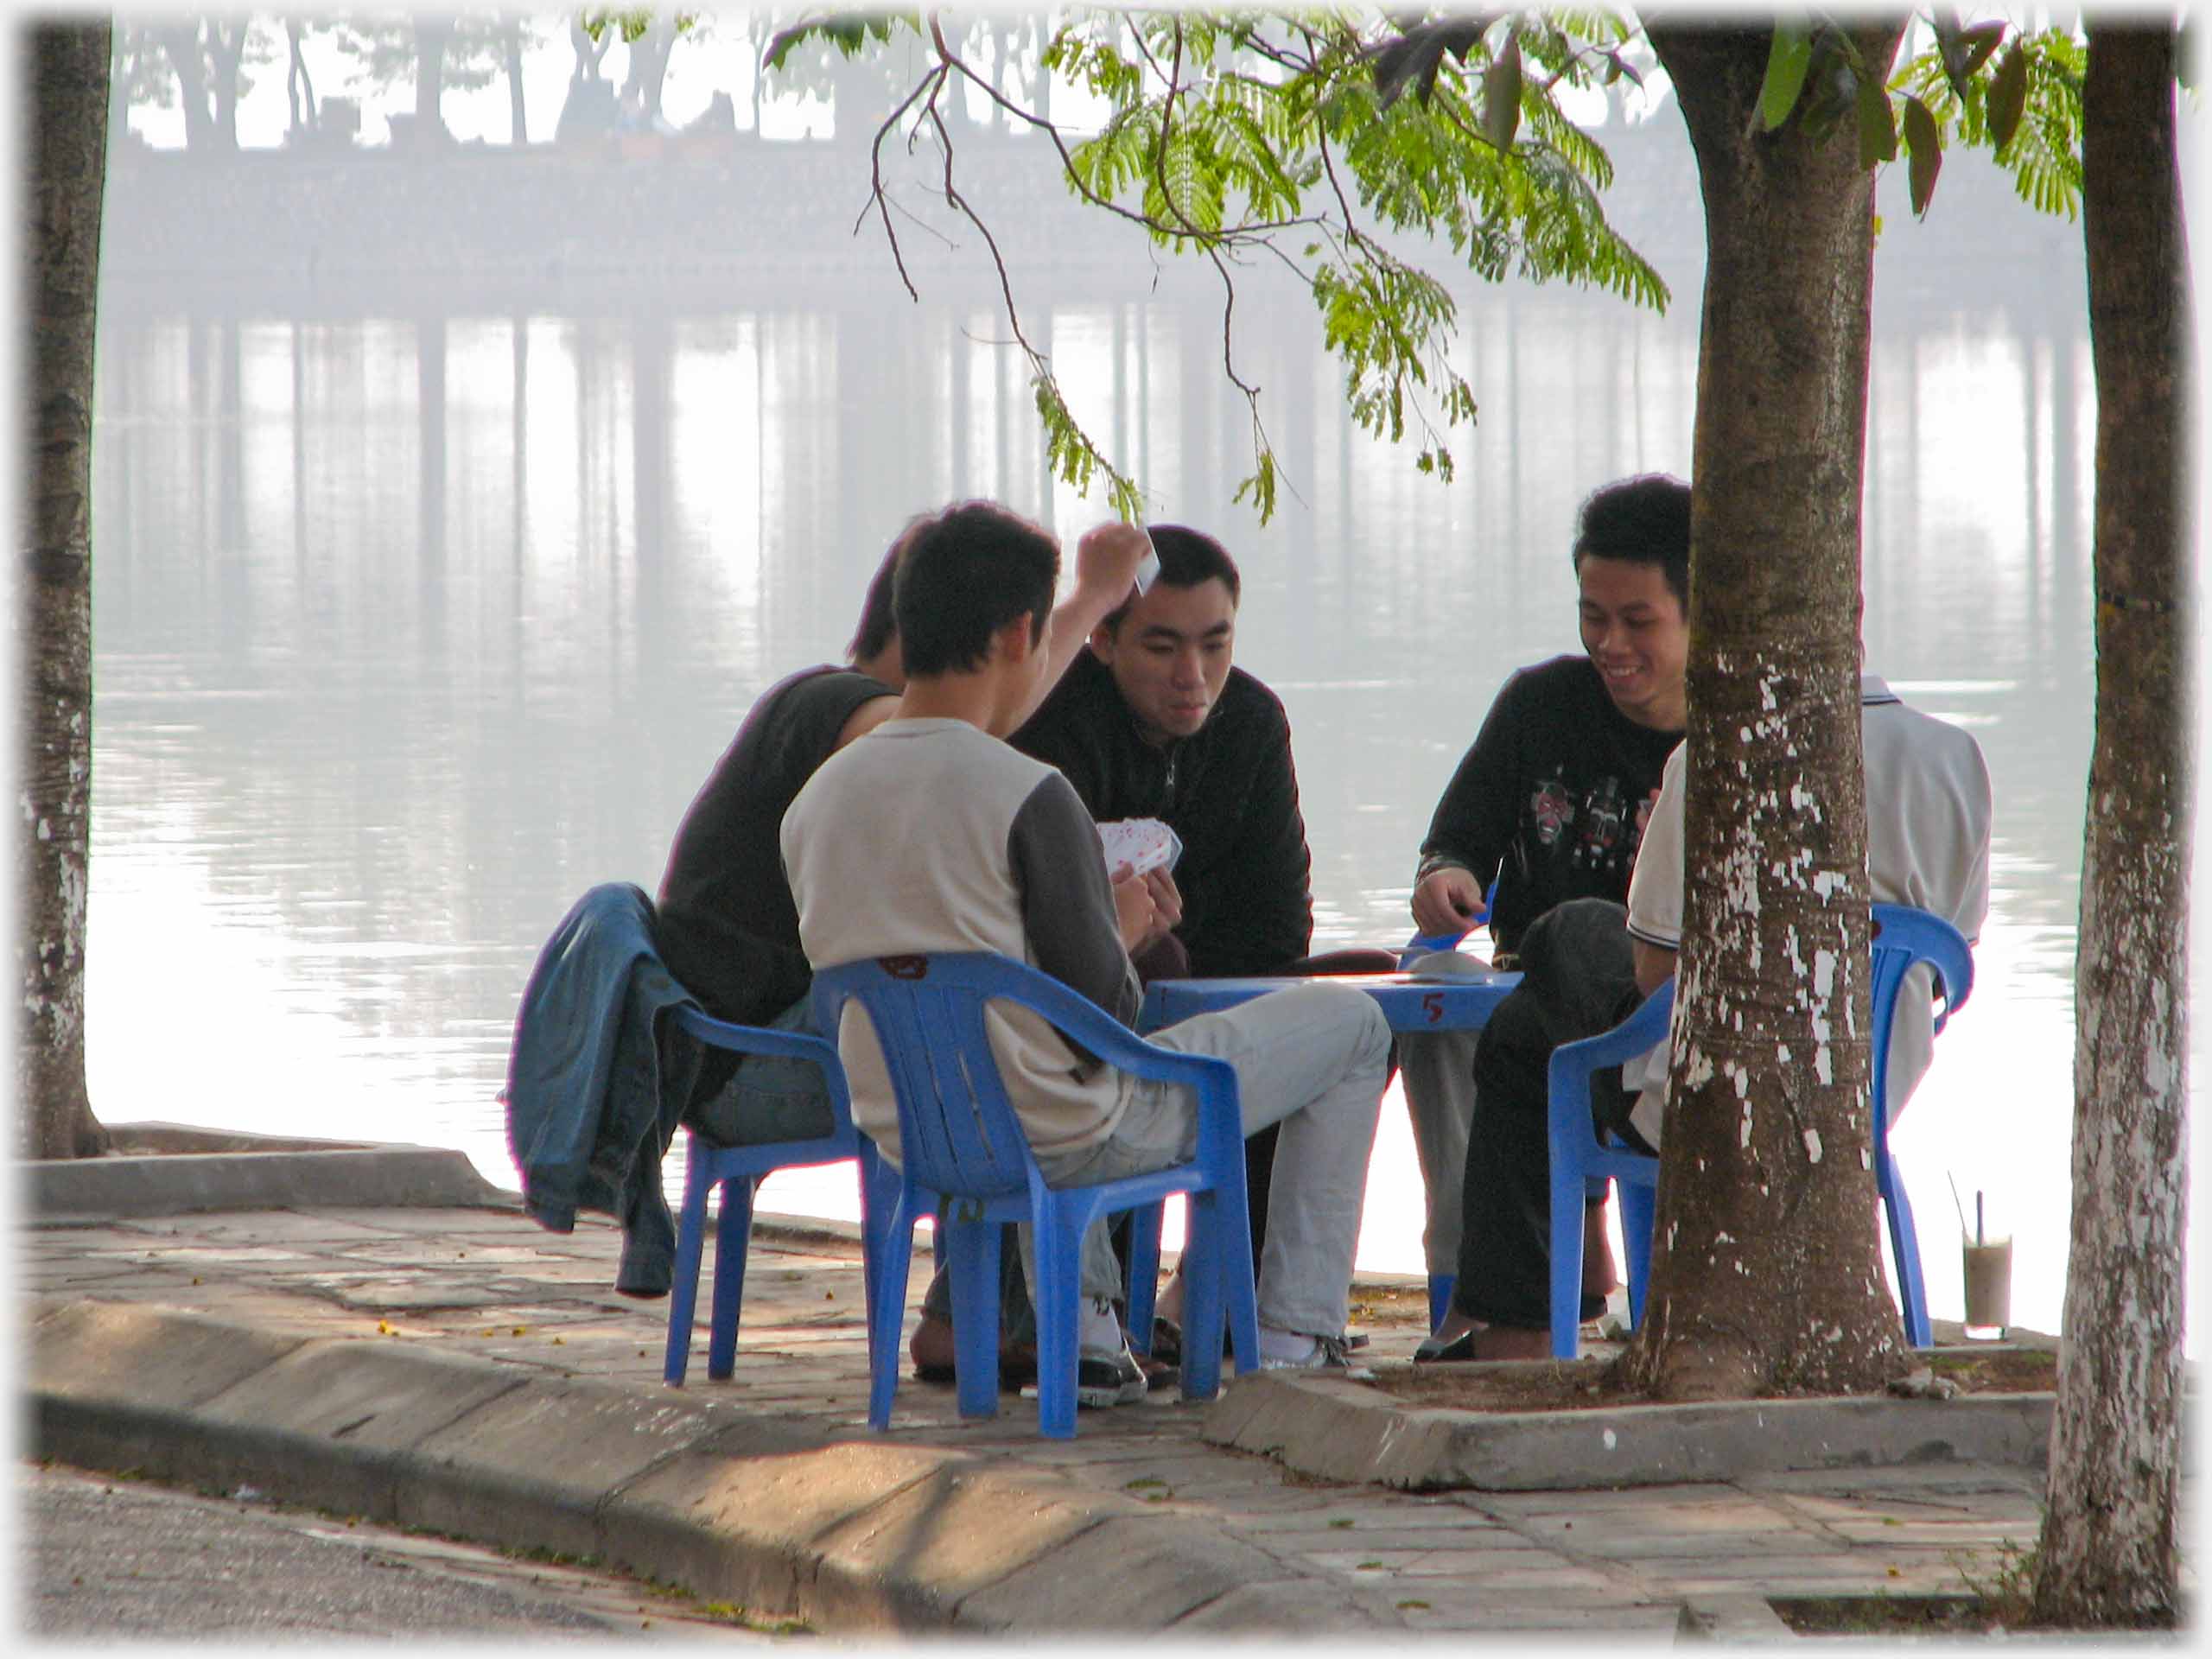 Five men on chairs round table playiing cards by lake.